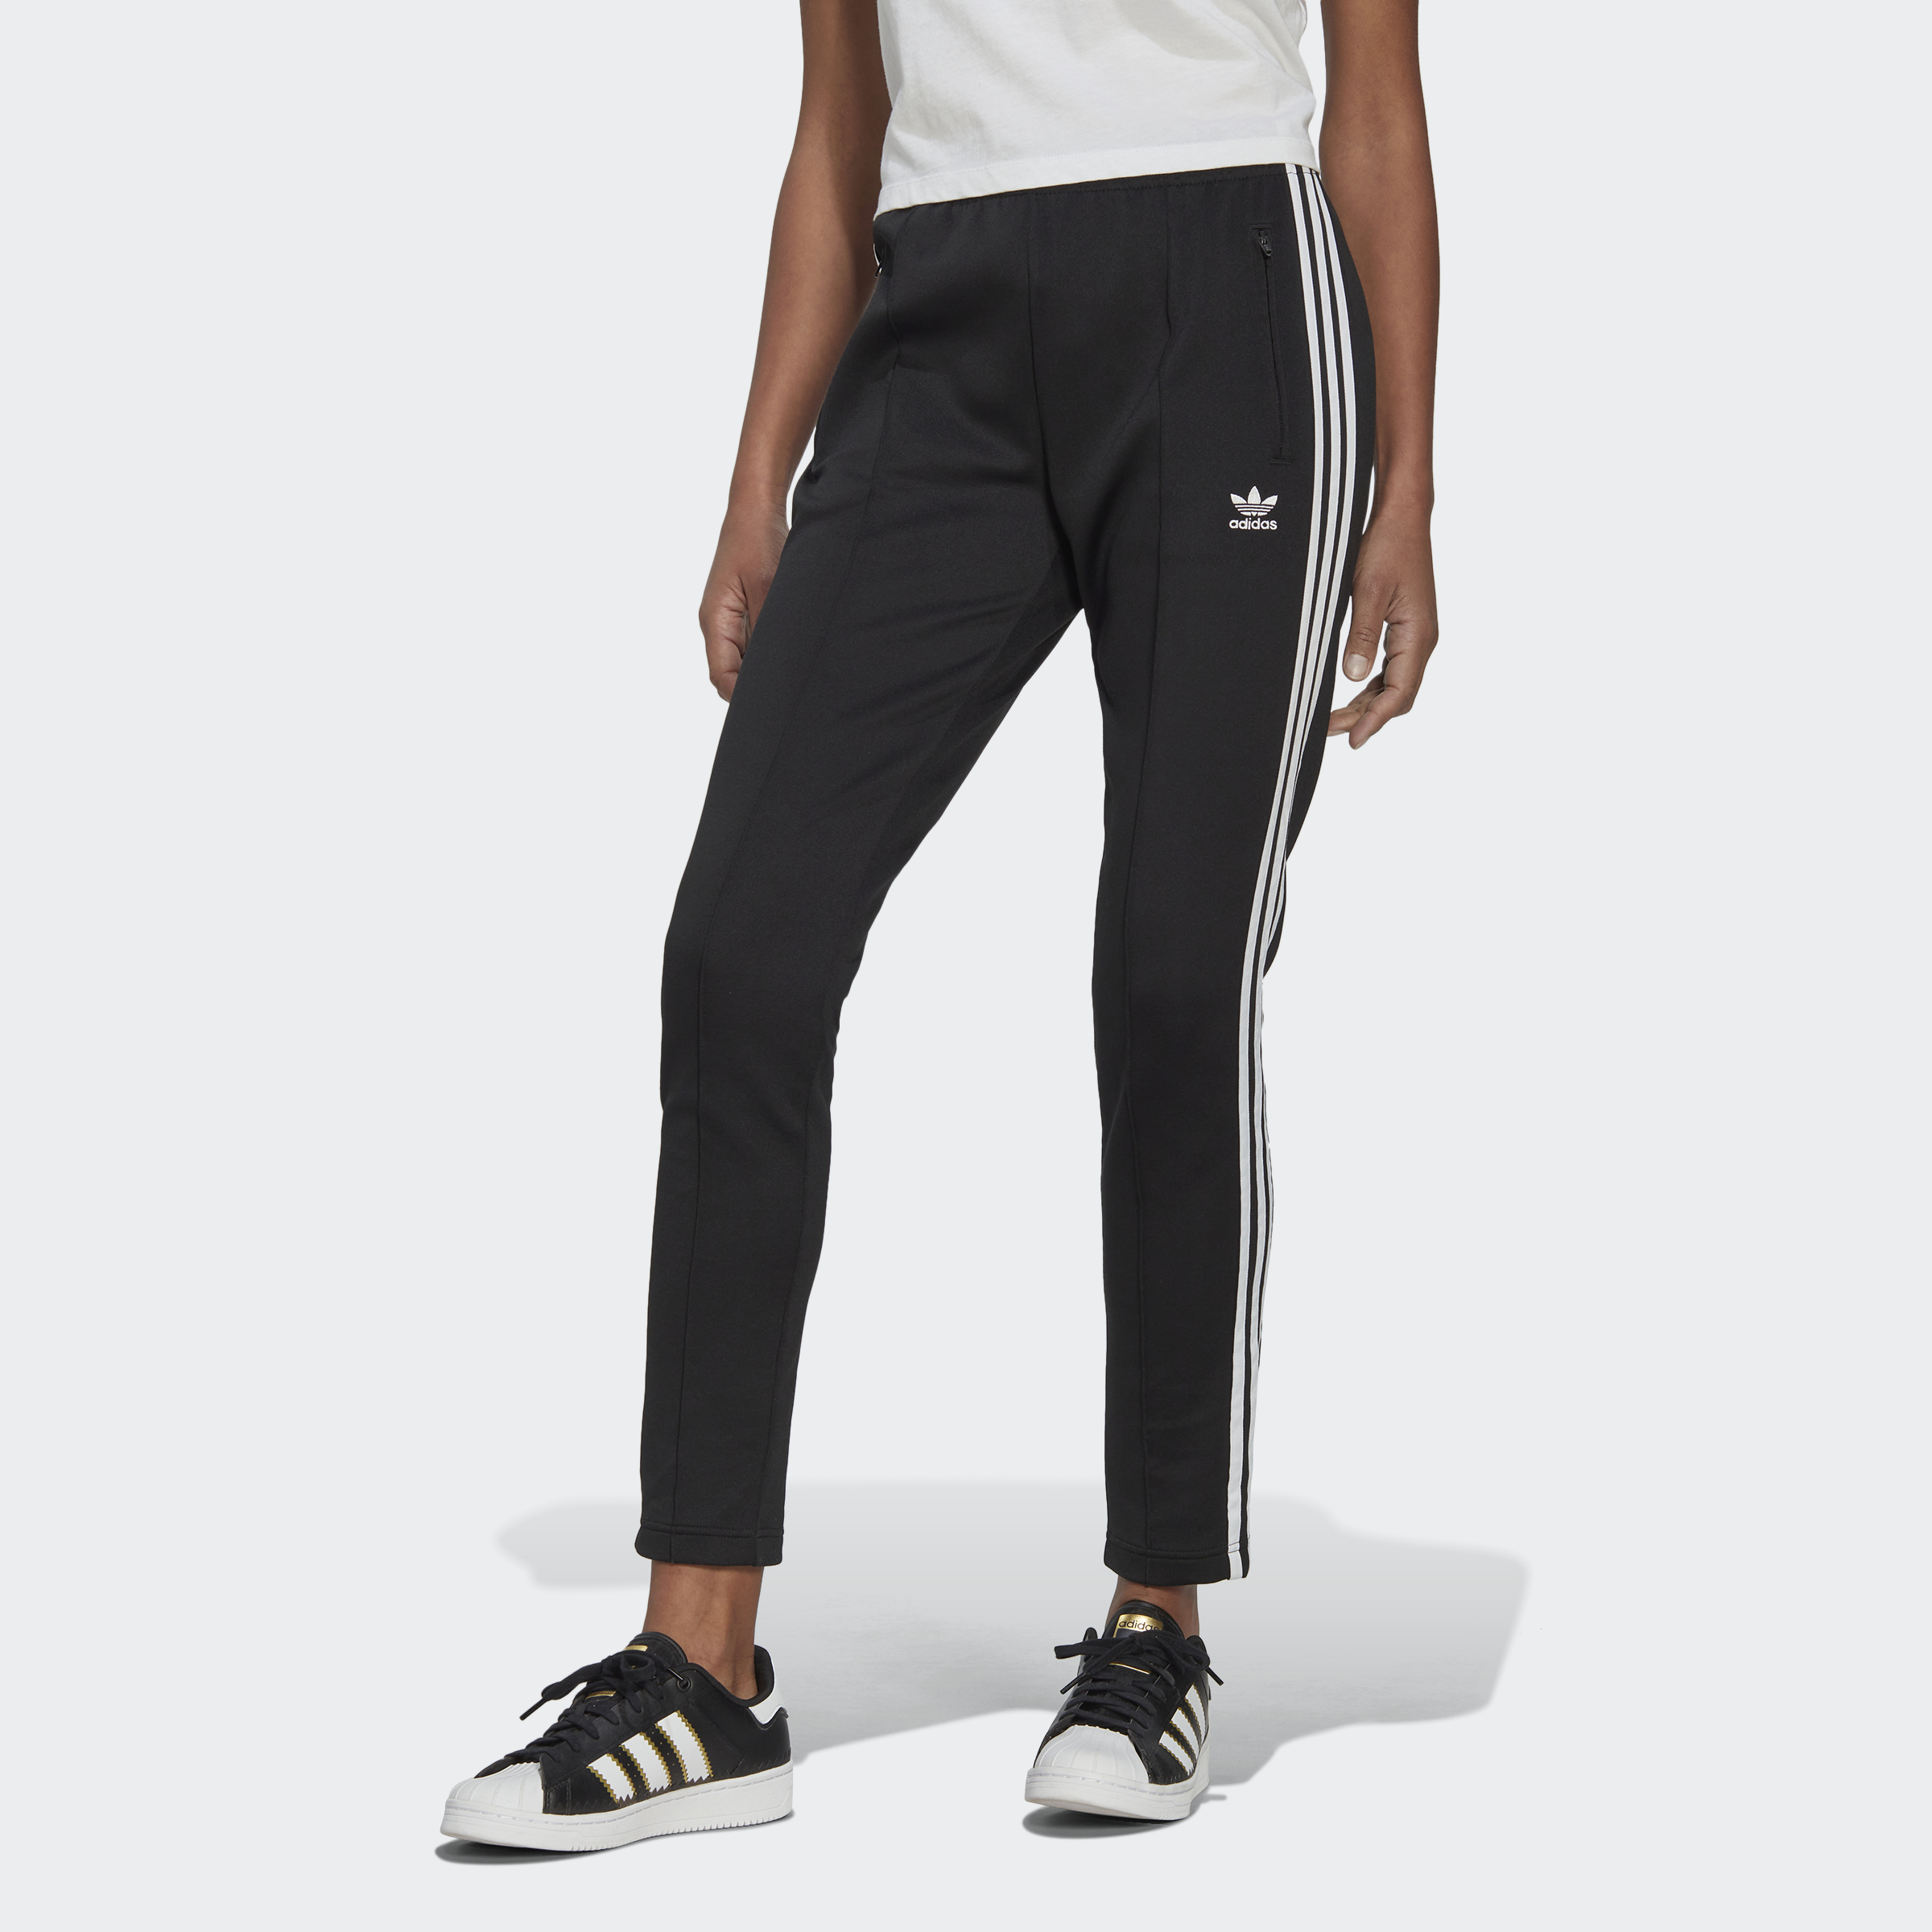 Women's Adidas Slim Straight Track Pant Size M - Black/White for sale online